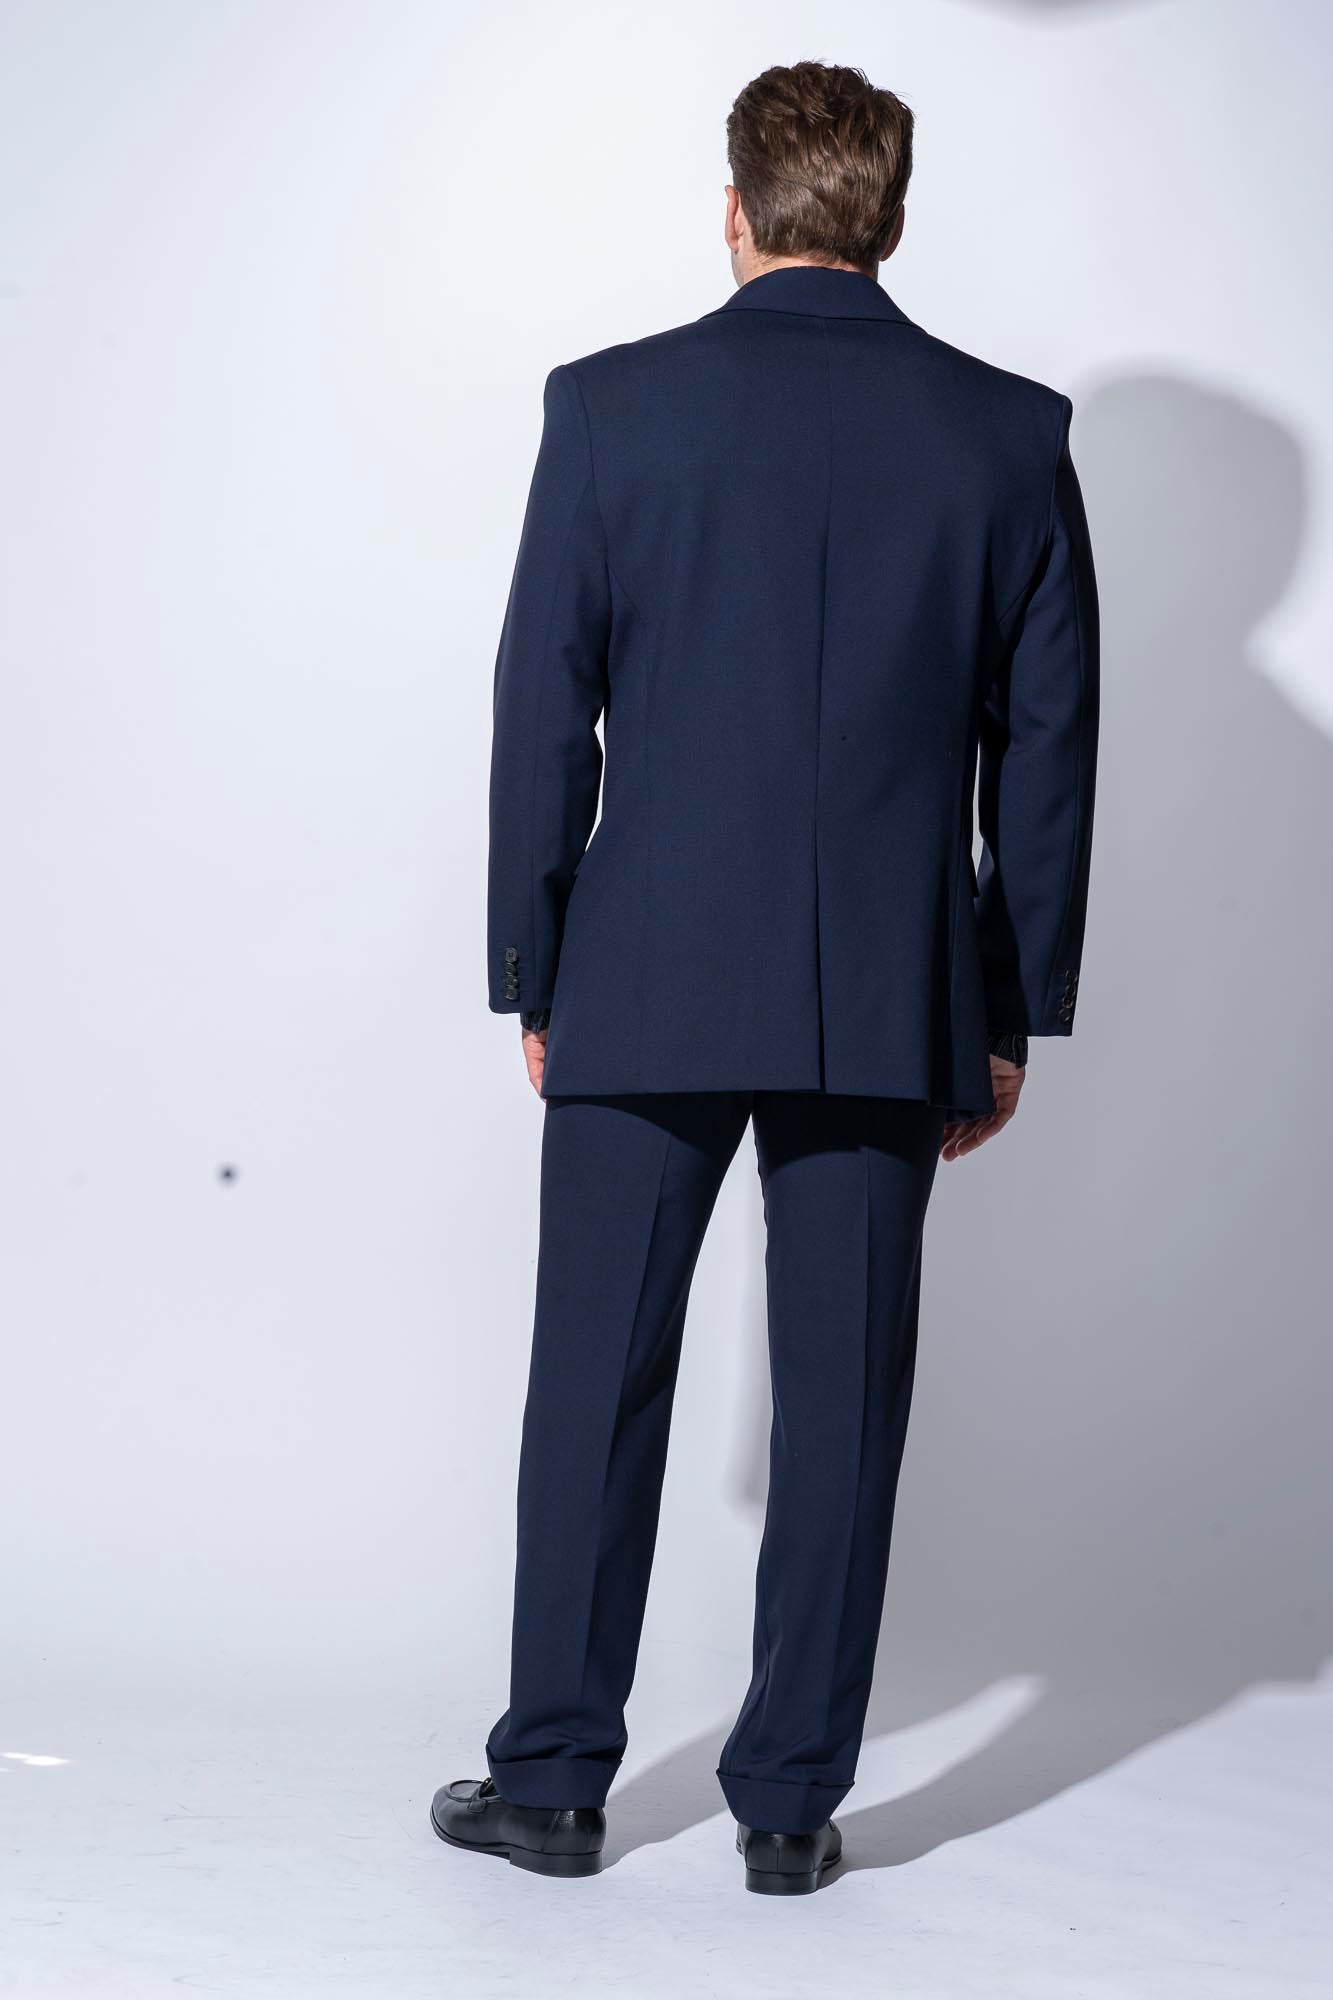 Couture Mens Suit- Blazer and Pants